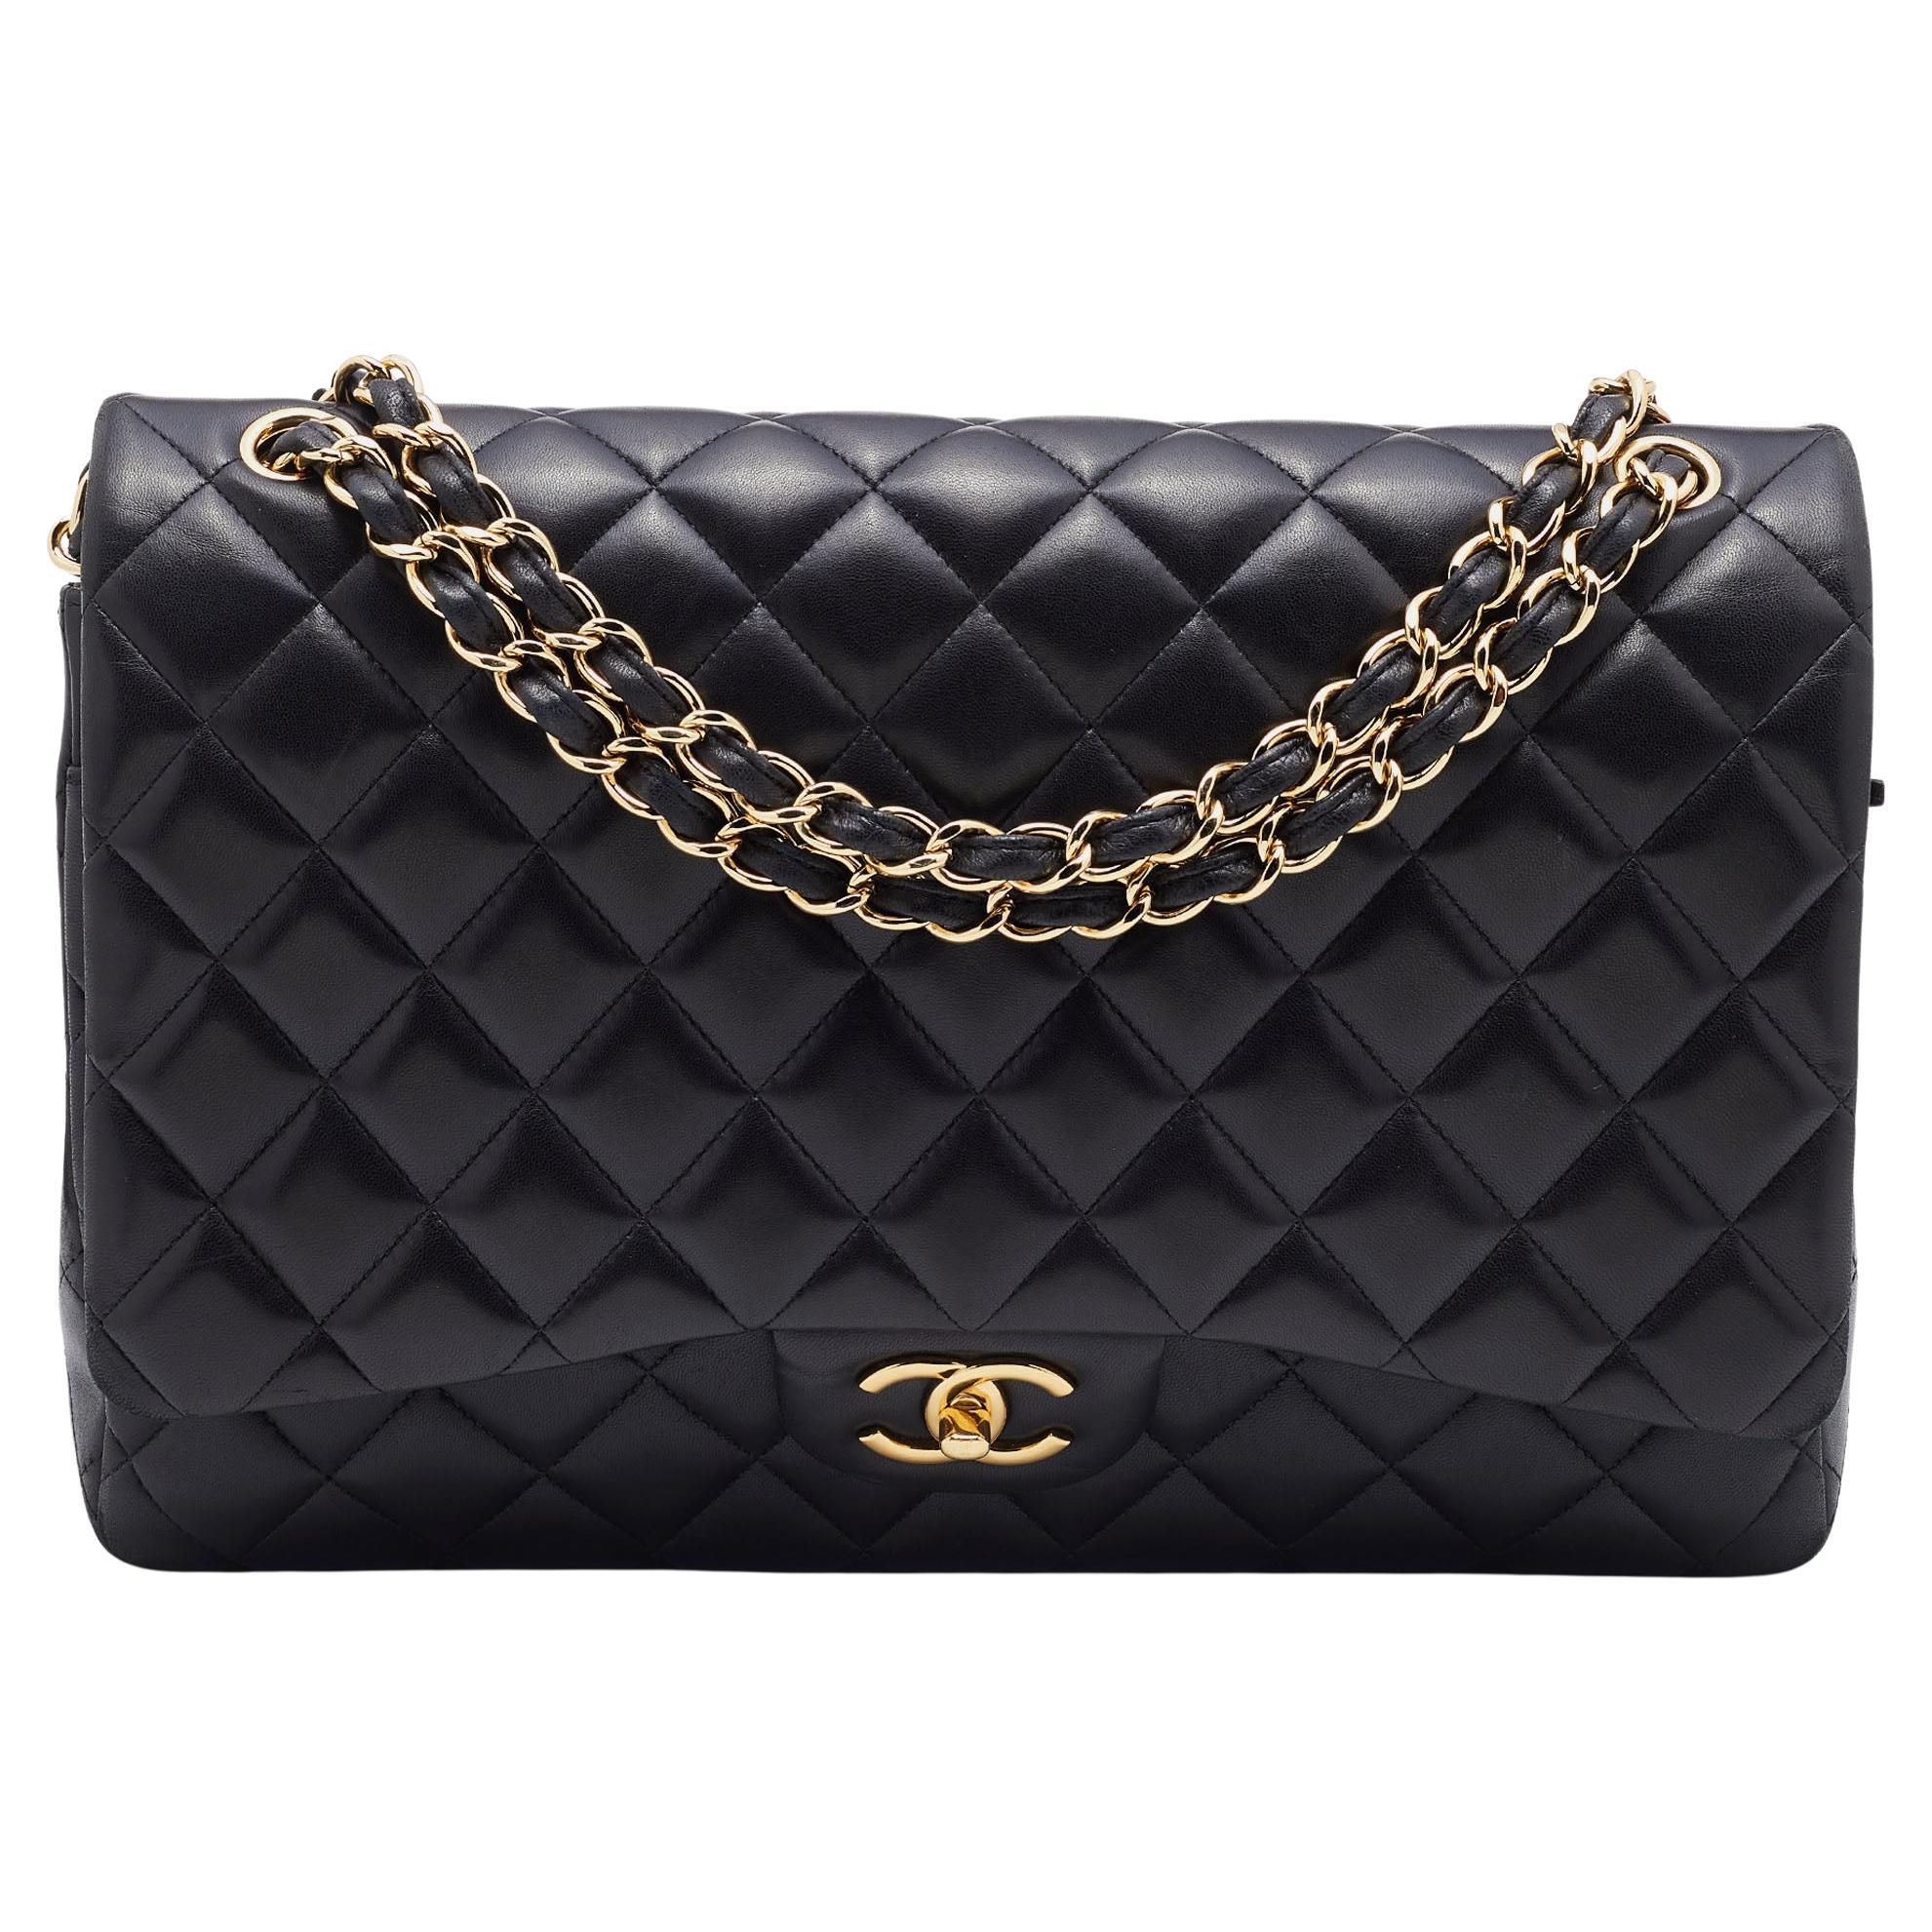 Chanel Black Quilted Leather Maxi Classic Double Flap Bag at